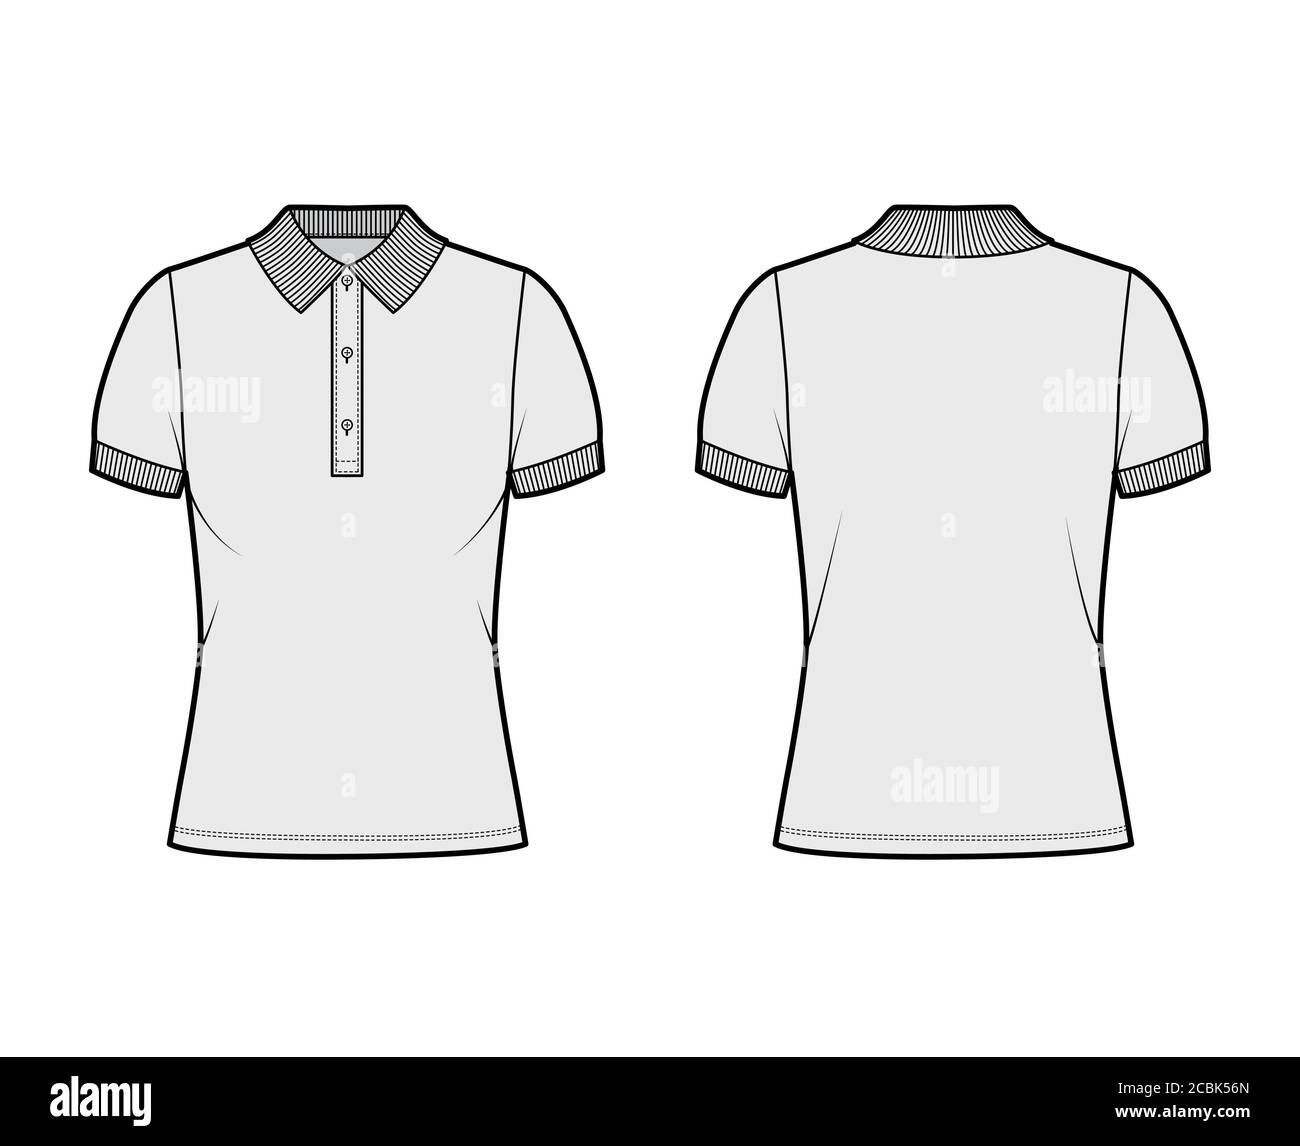 Download Polo Shirt Technical Fashion Illustration With Cotton Jersey Short Sleeves Oversized Buttons Along The Front Flat Outwear Apparel Template Front Back Grey Color Women Men Unisex Top Cad Mockup Stock Vector Image